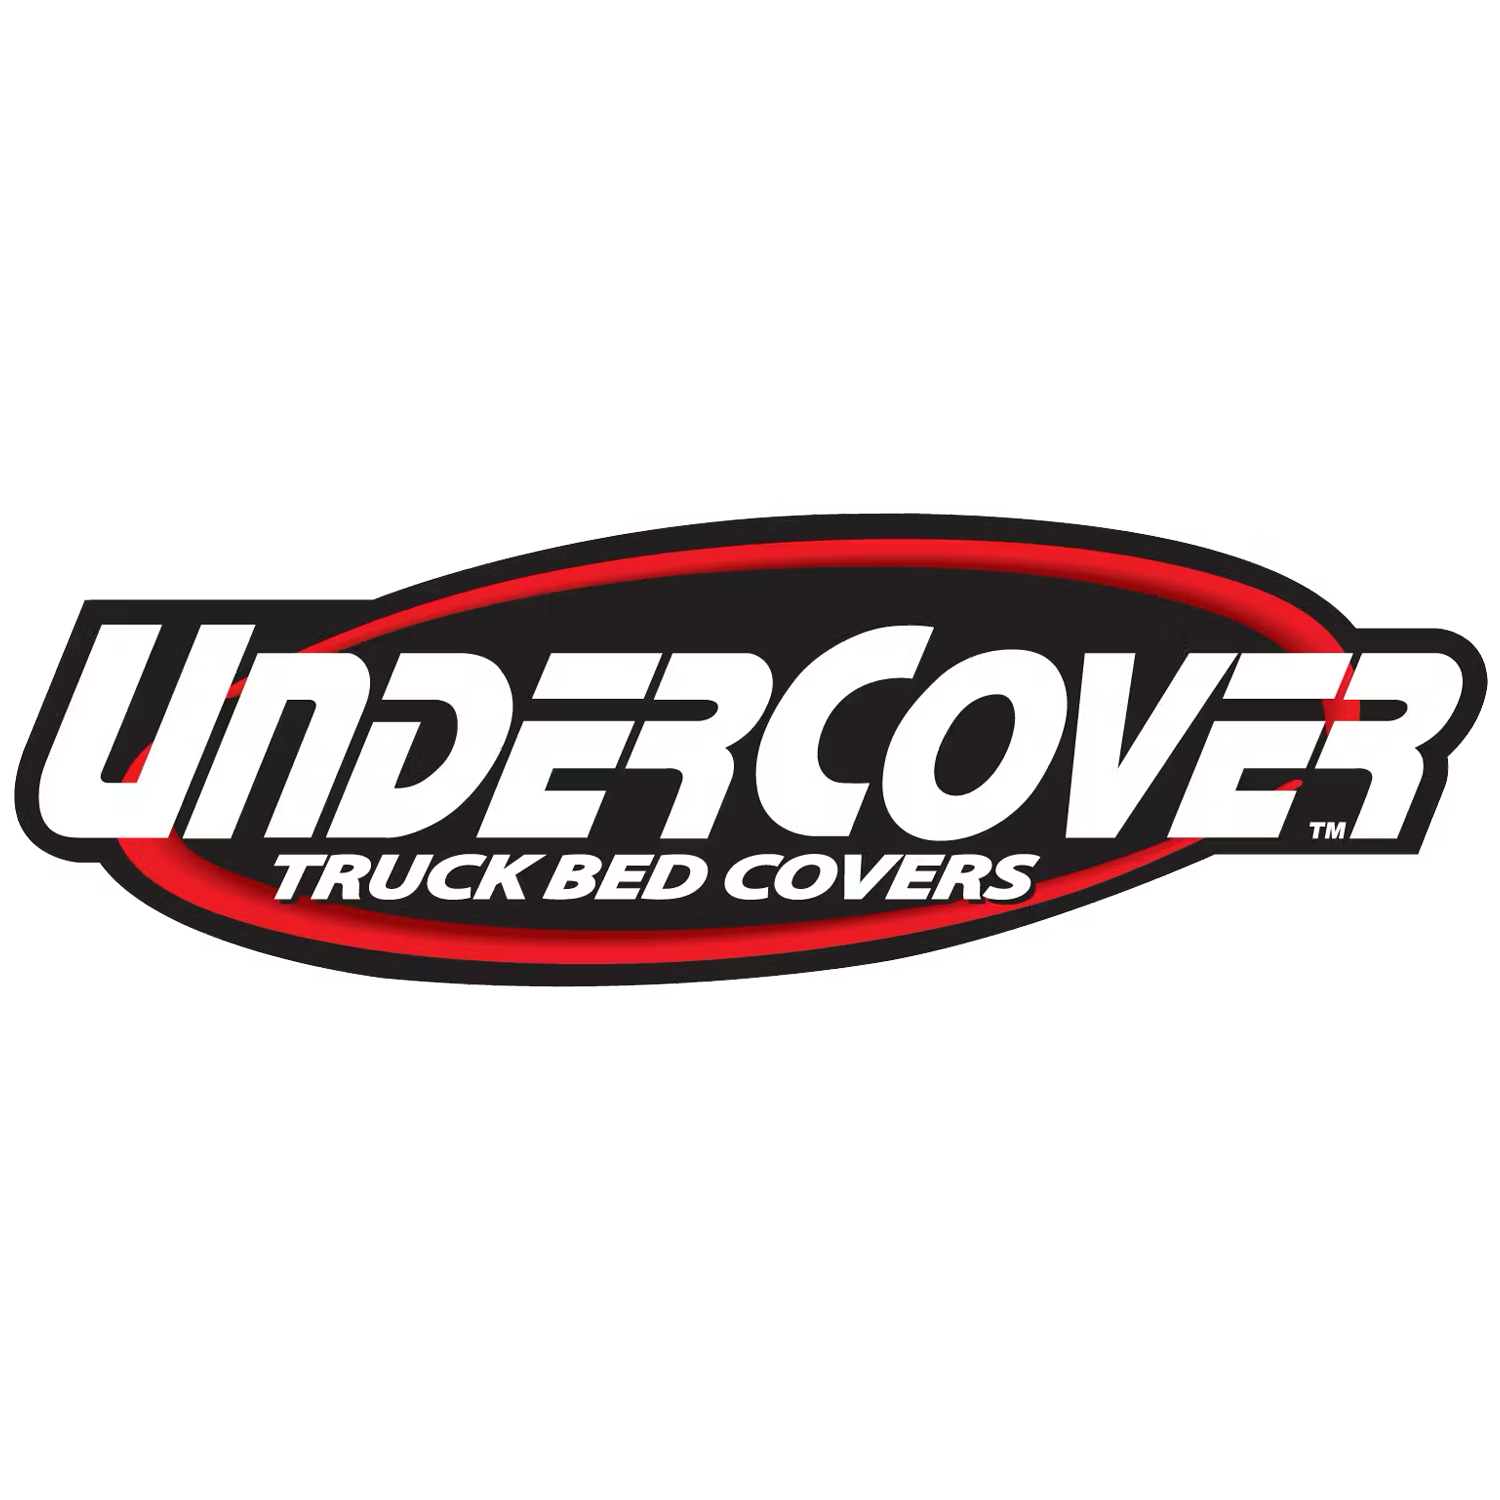 Undercover Truck Bed Covers.png